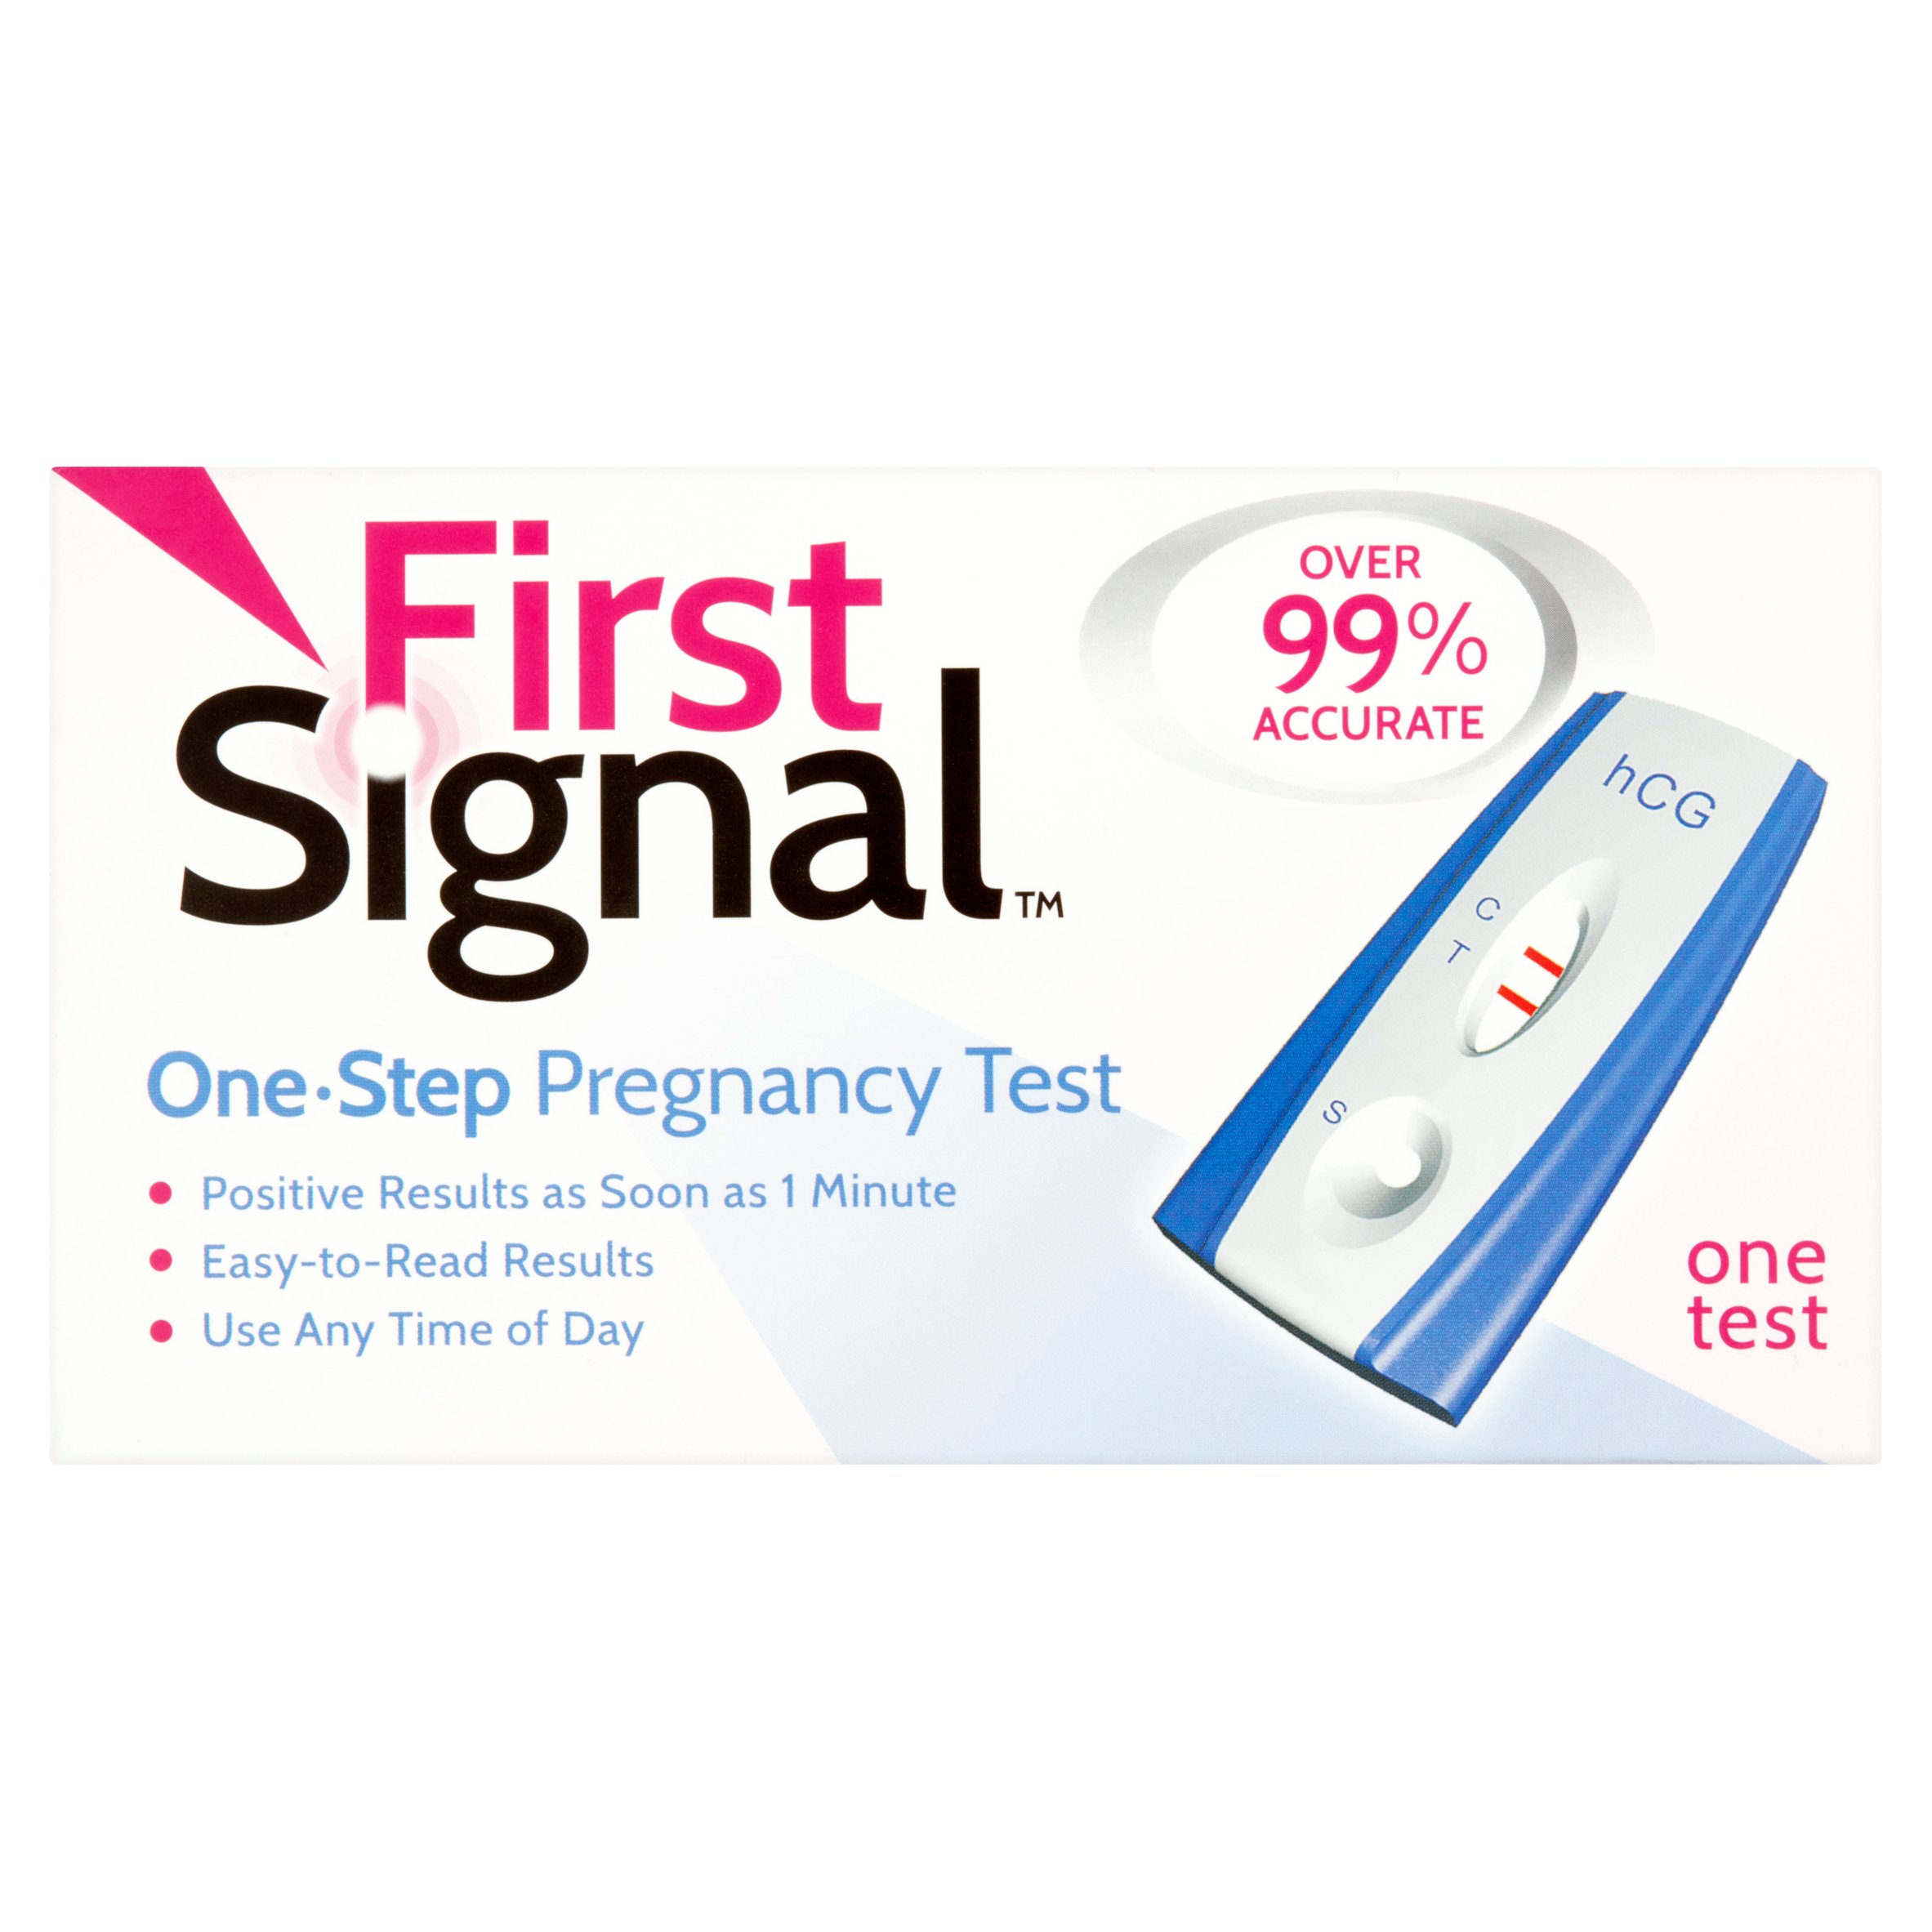 First Signal One-Step Pregnancy Test - image 1 of 5